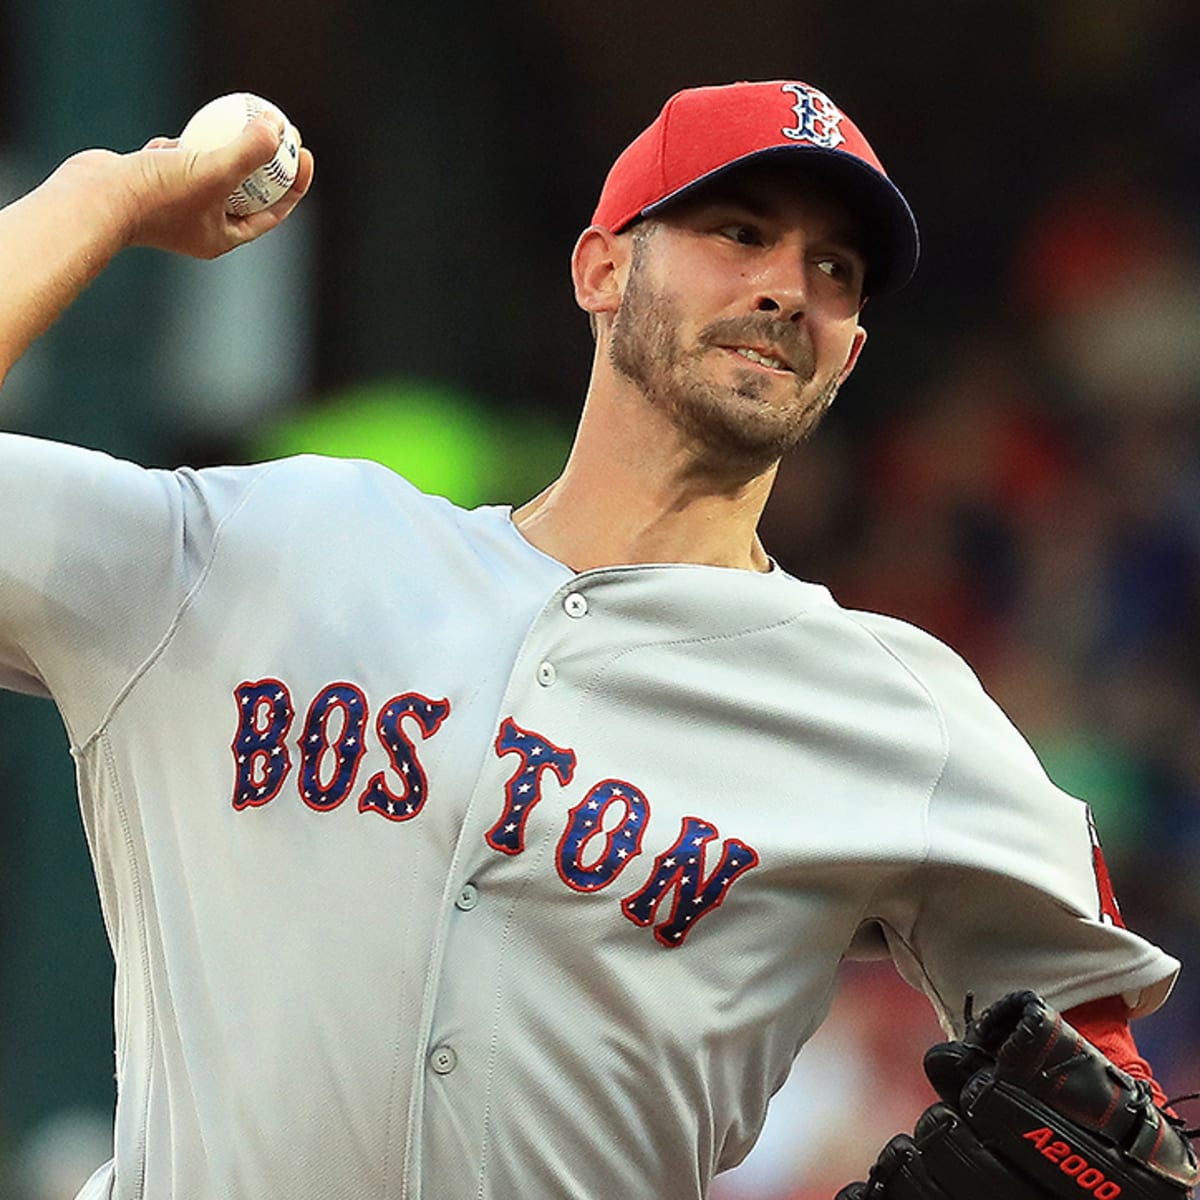 Facing Tigers just another game for Rick Porcello